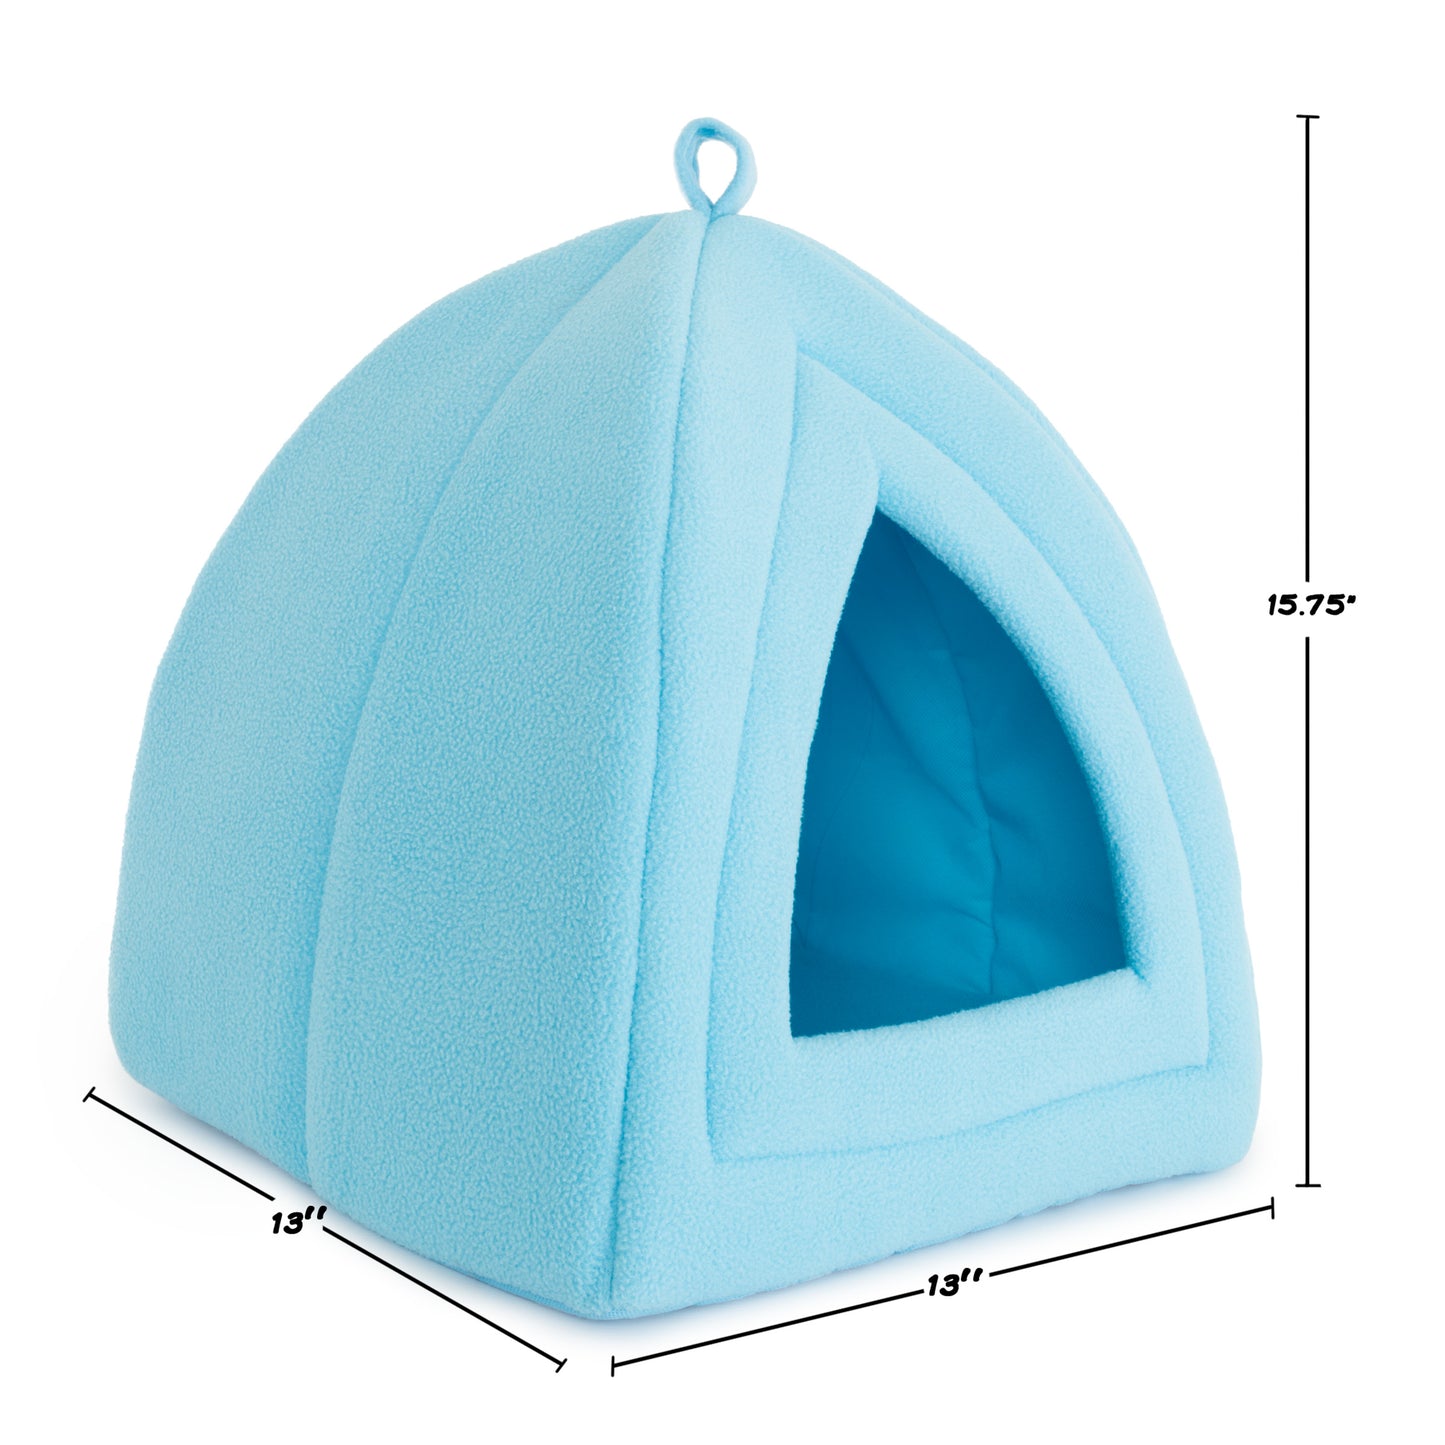 Pet Adobe Cat House for Small Animals, Blue